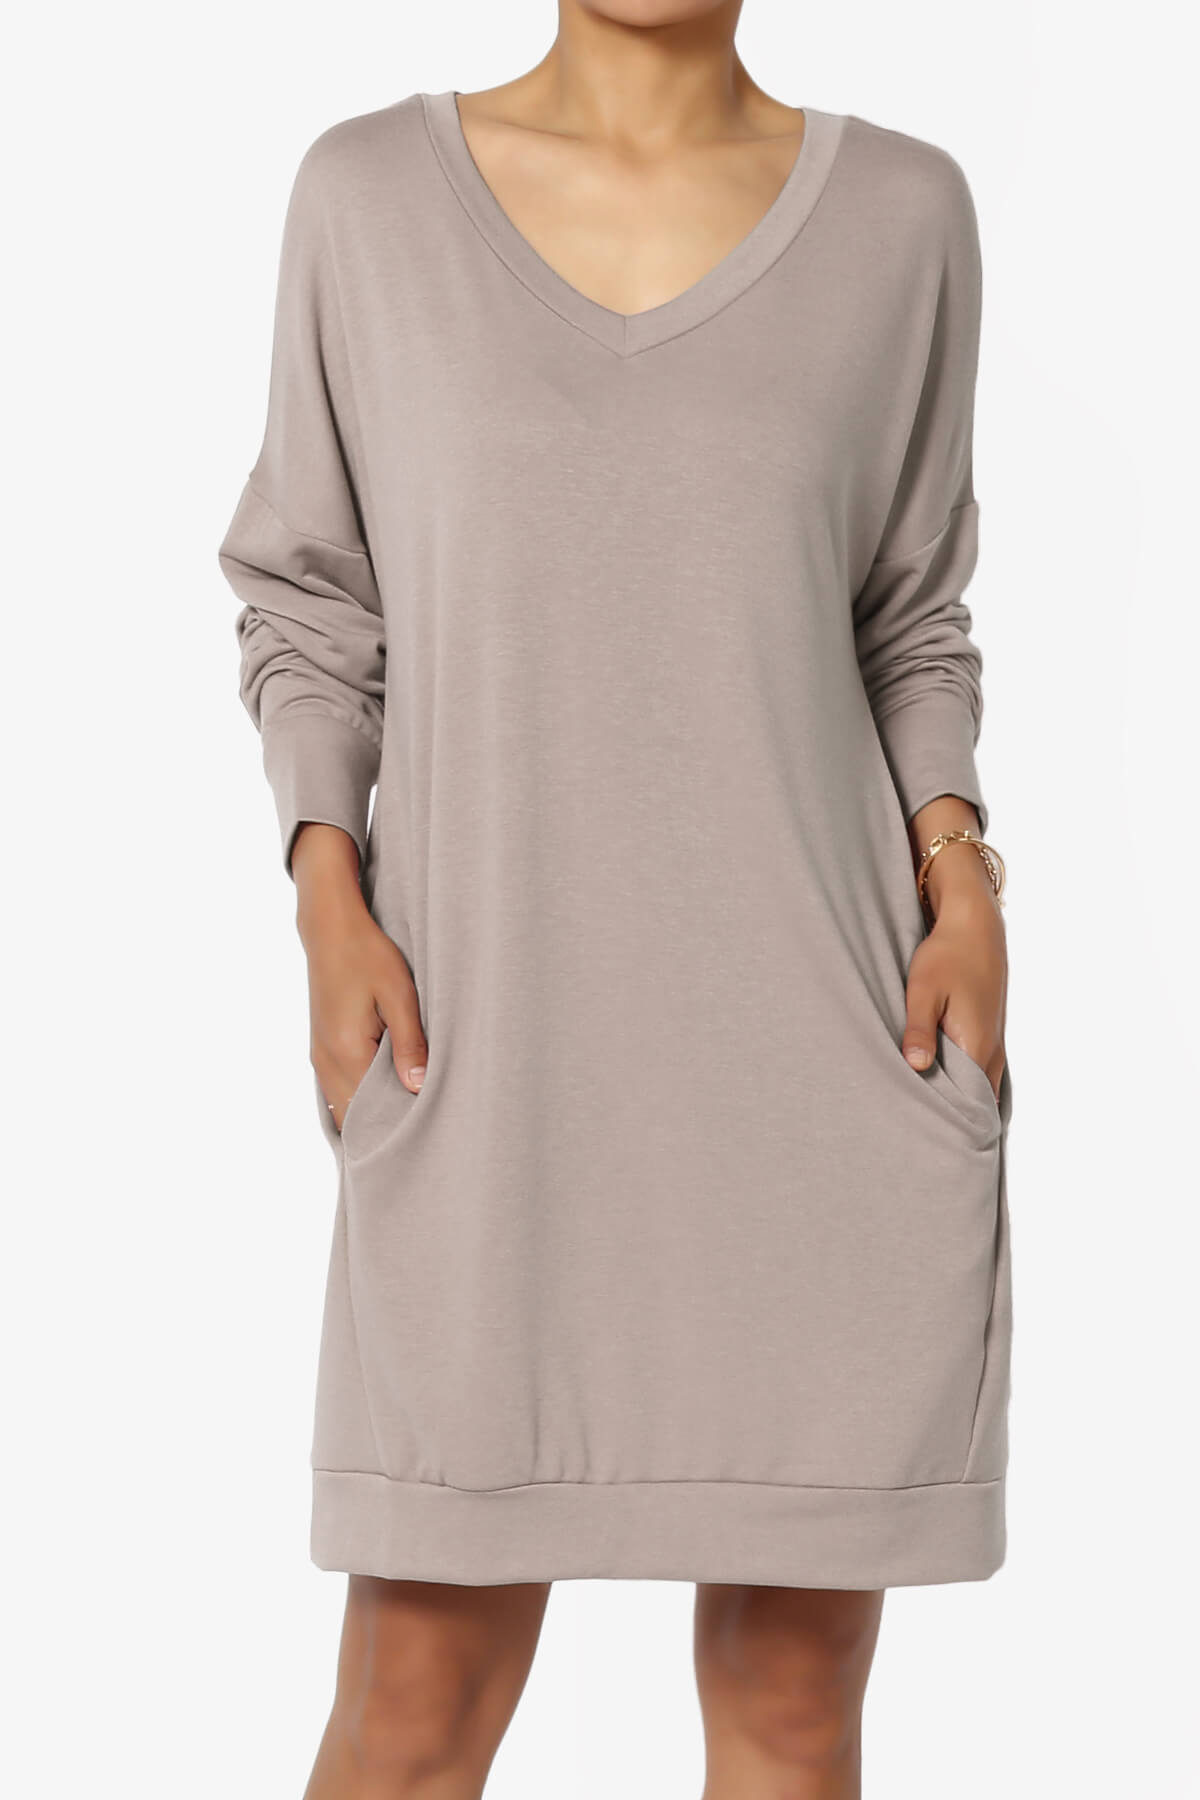 Load image into Gallery viewer, Chrissy V-Neck Pocket Soft Terry Tunic LIGHT MOCHA_1
